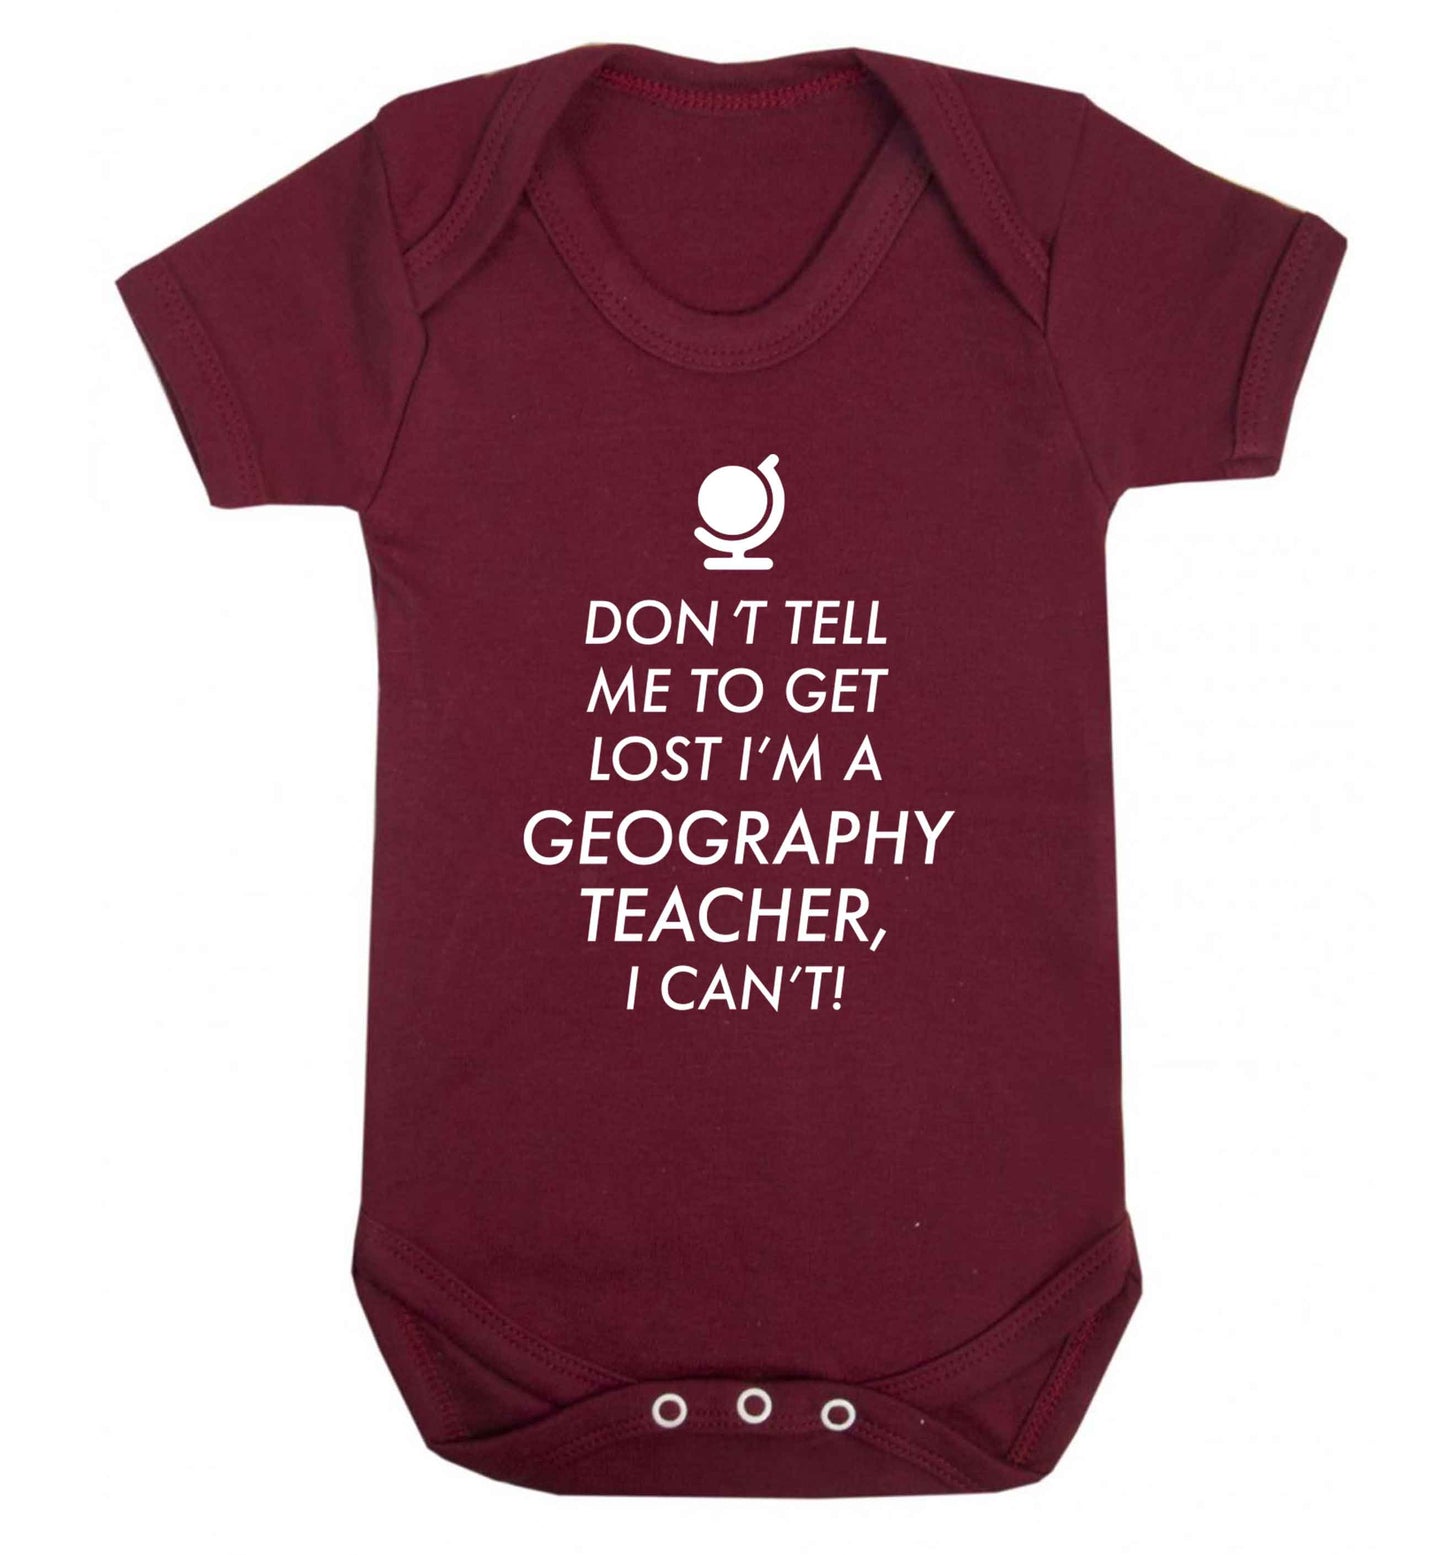 Don't tell me to get lost I'm a geography teacher, I can't Baby Vest maroon 18-24 months